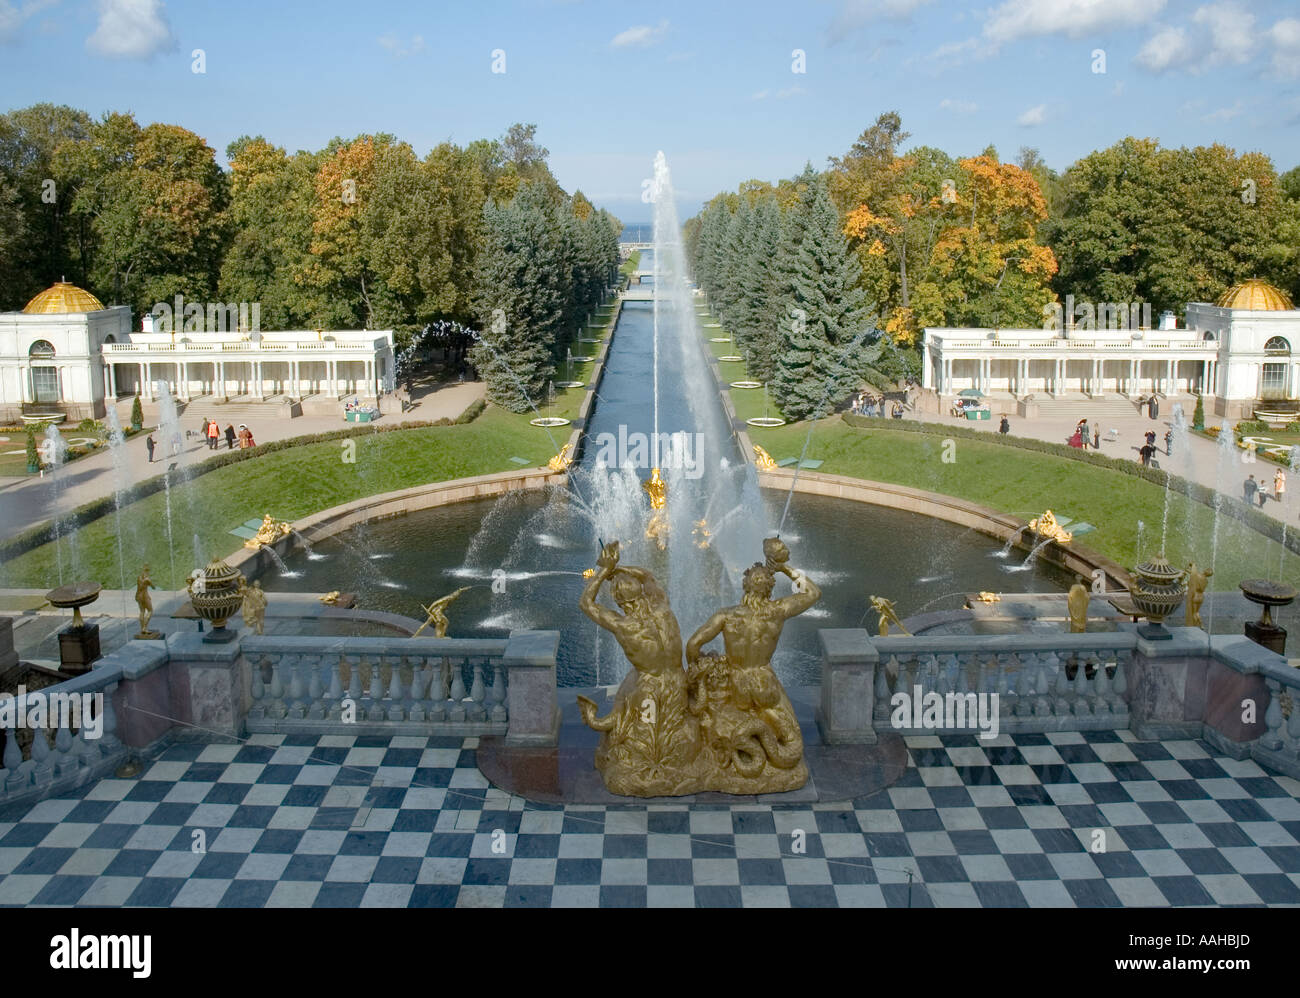 The gardens of the Royal Palace at Peterhoff near Saint Petersburg, Russia Stock Photo